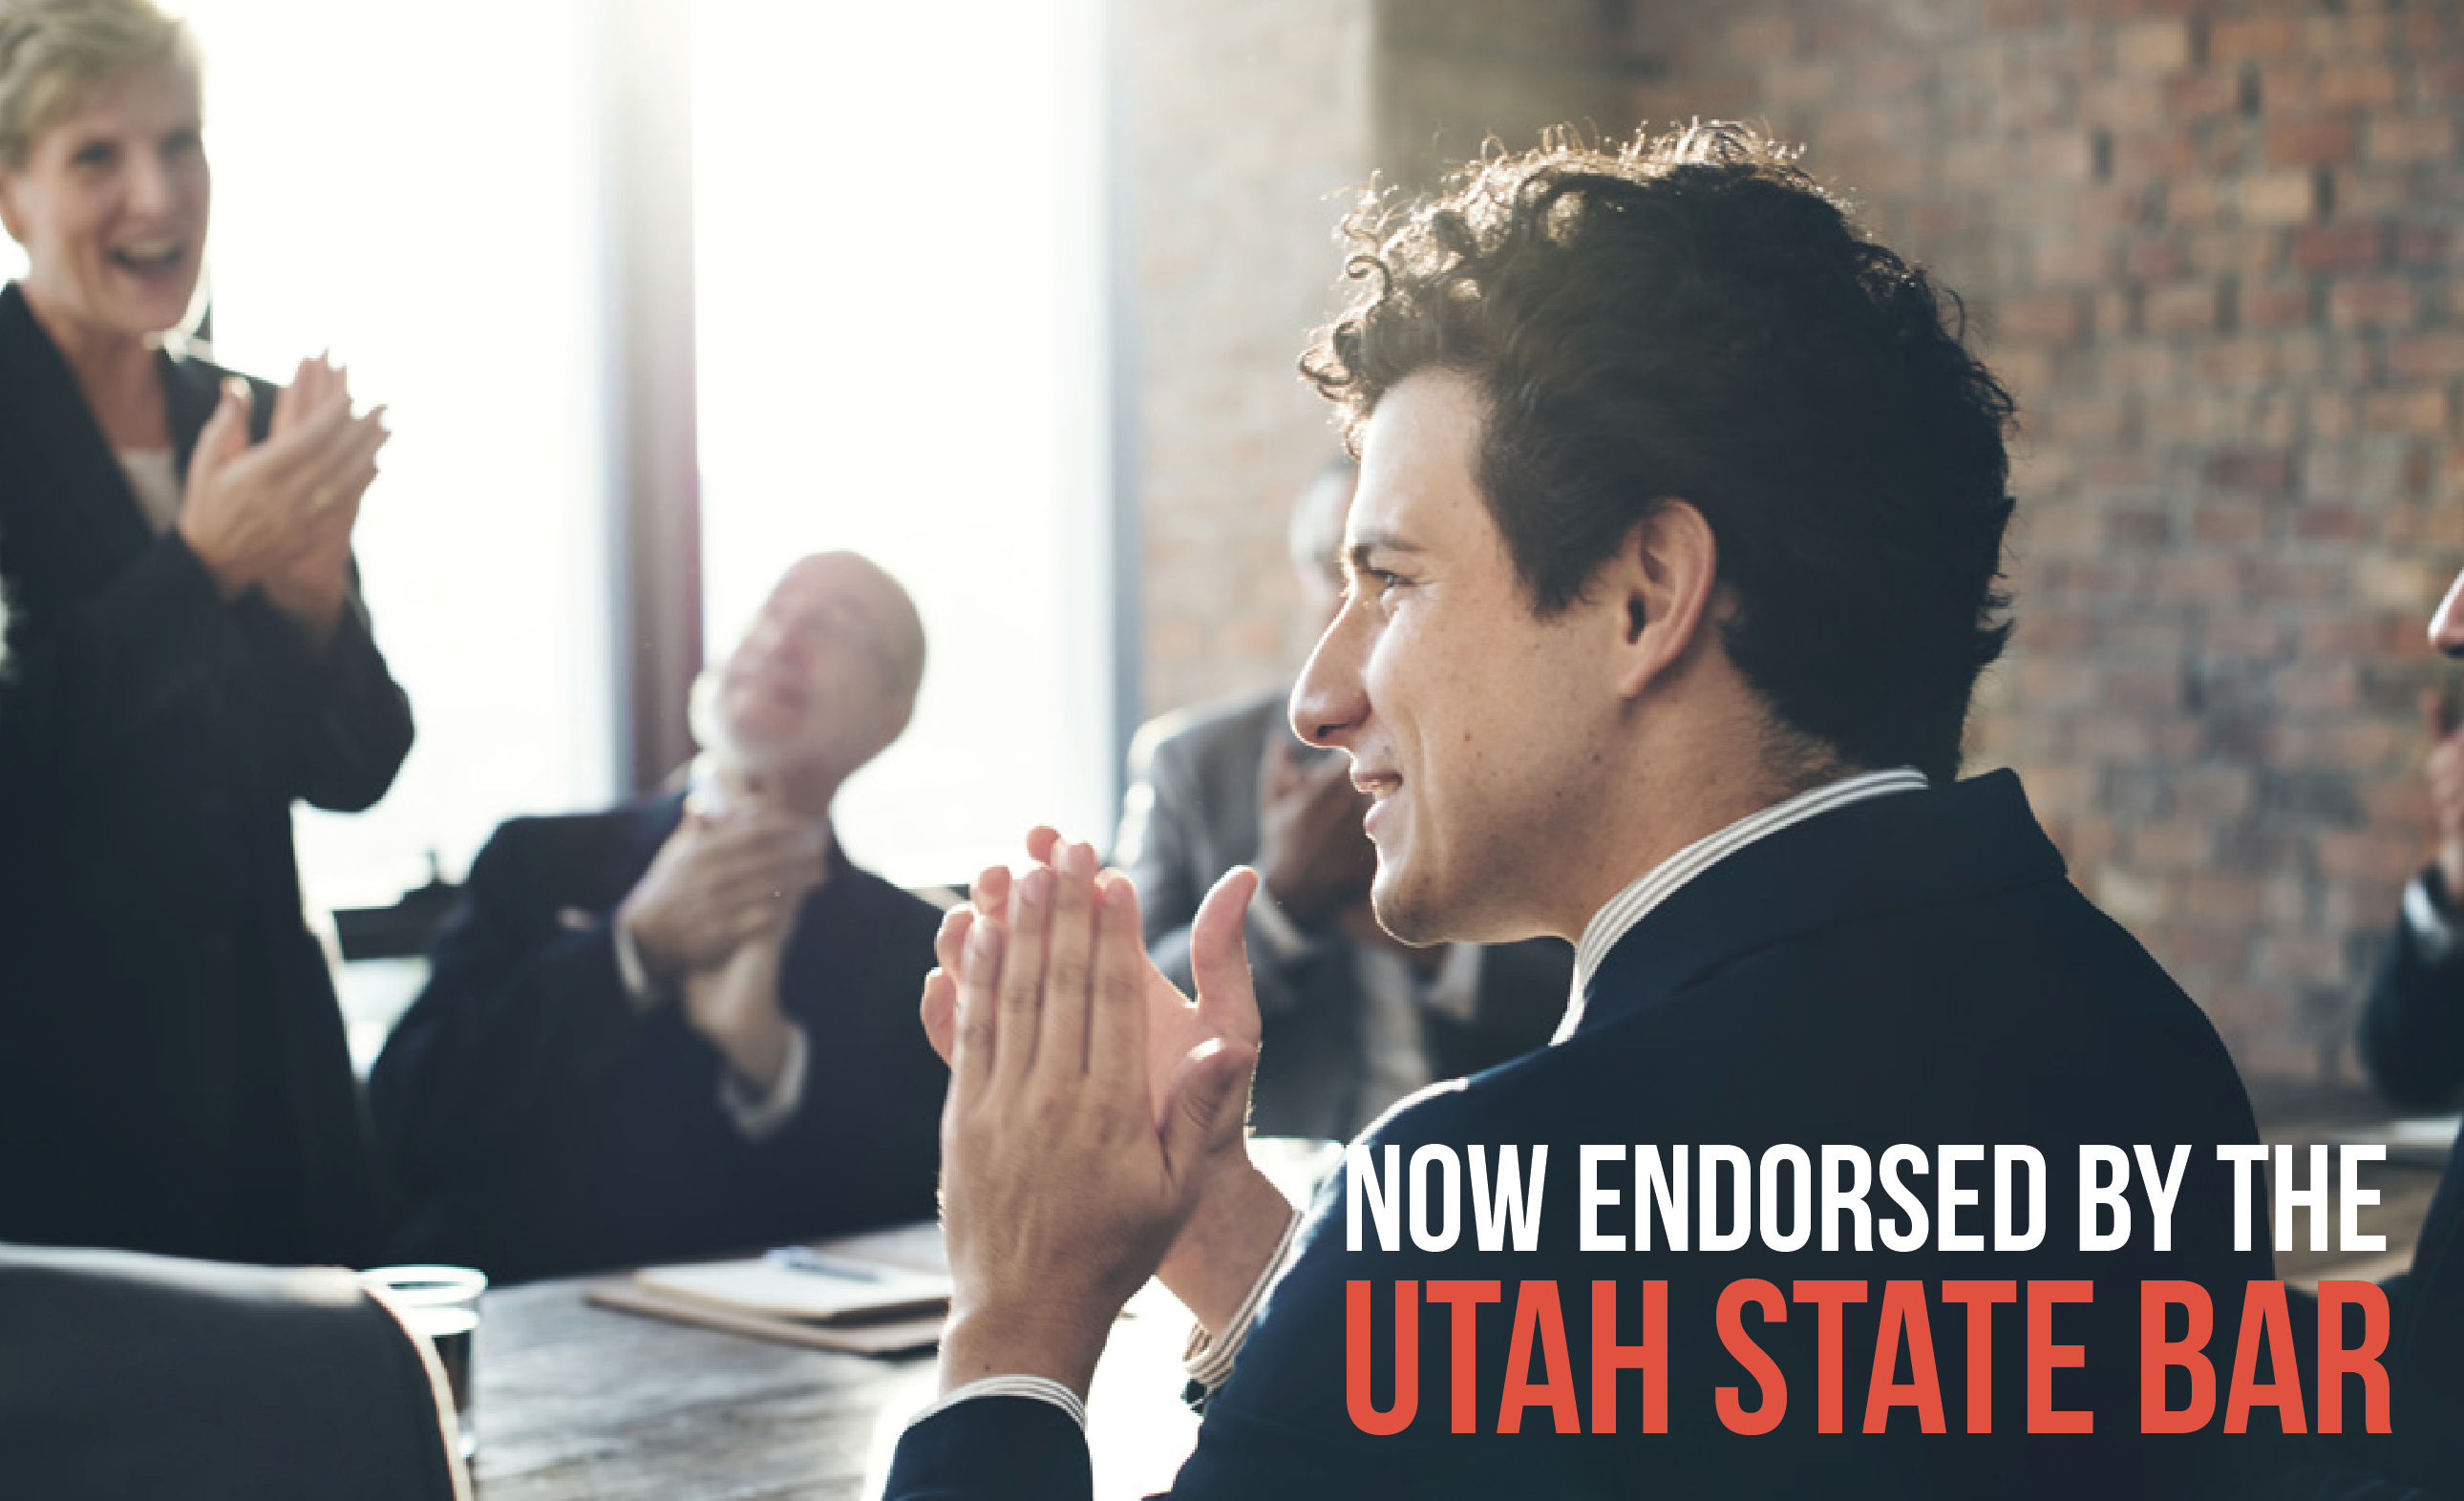 Utah State Bar Endorses ALPS as the Legal Malpractice Insurance Carrier of Choice for Members.